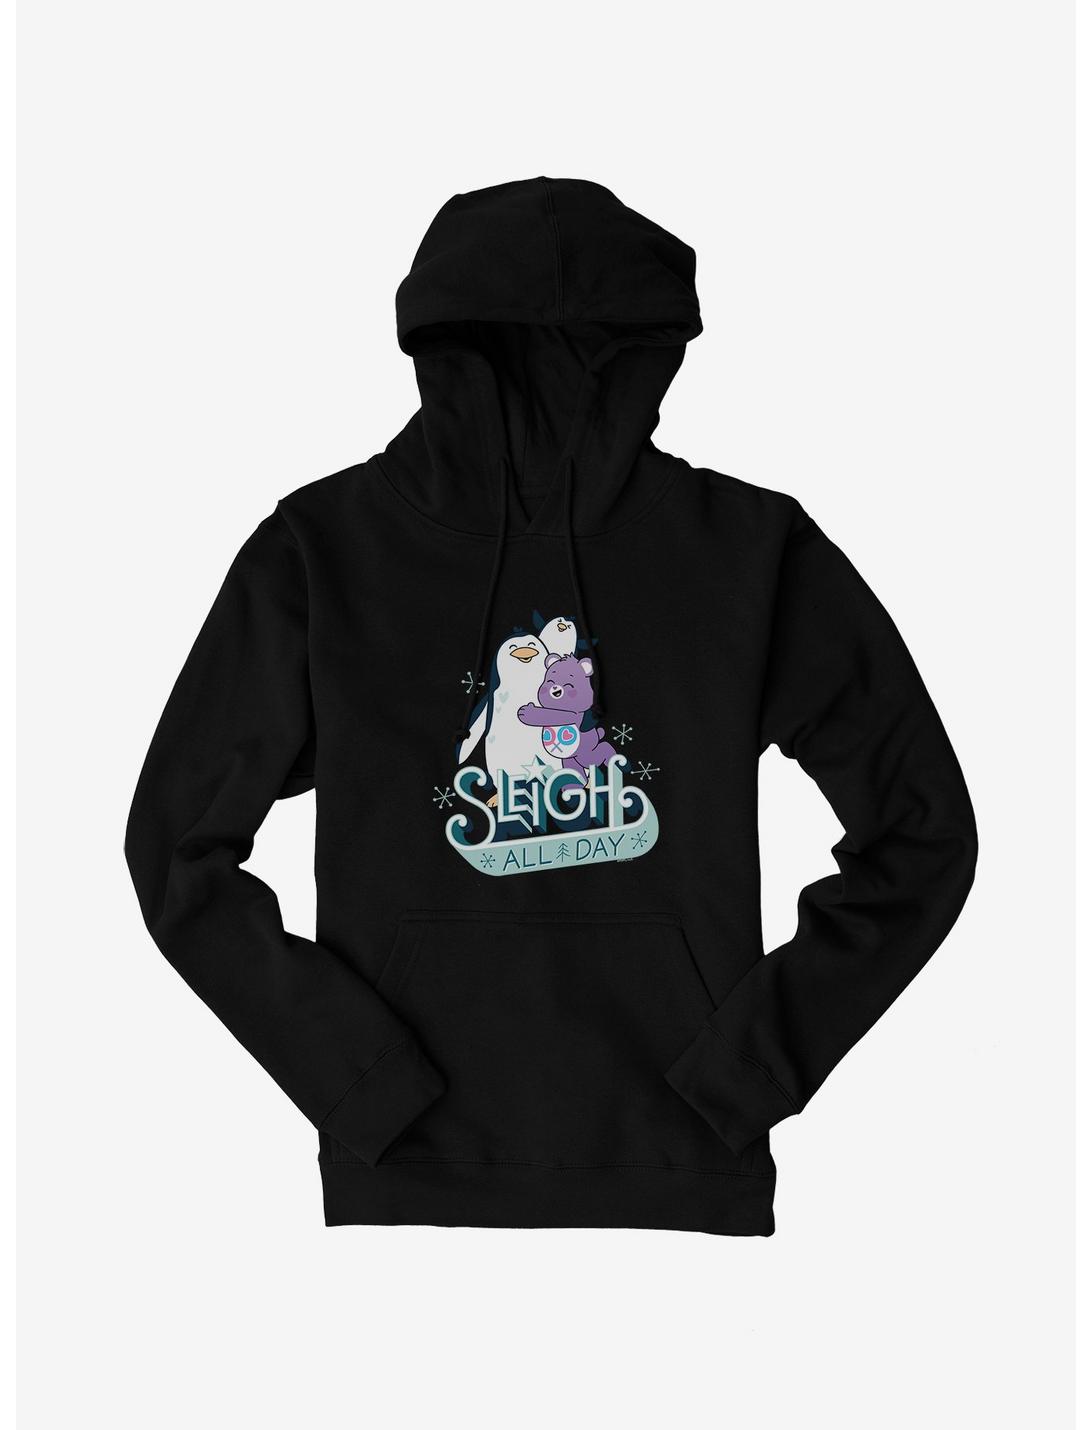 Care Bears Sleigh All Day Hoodie, , hi-res